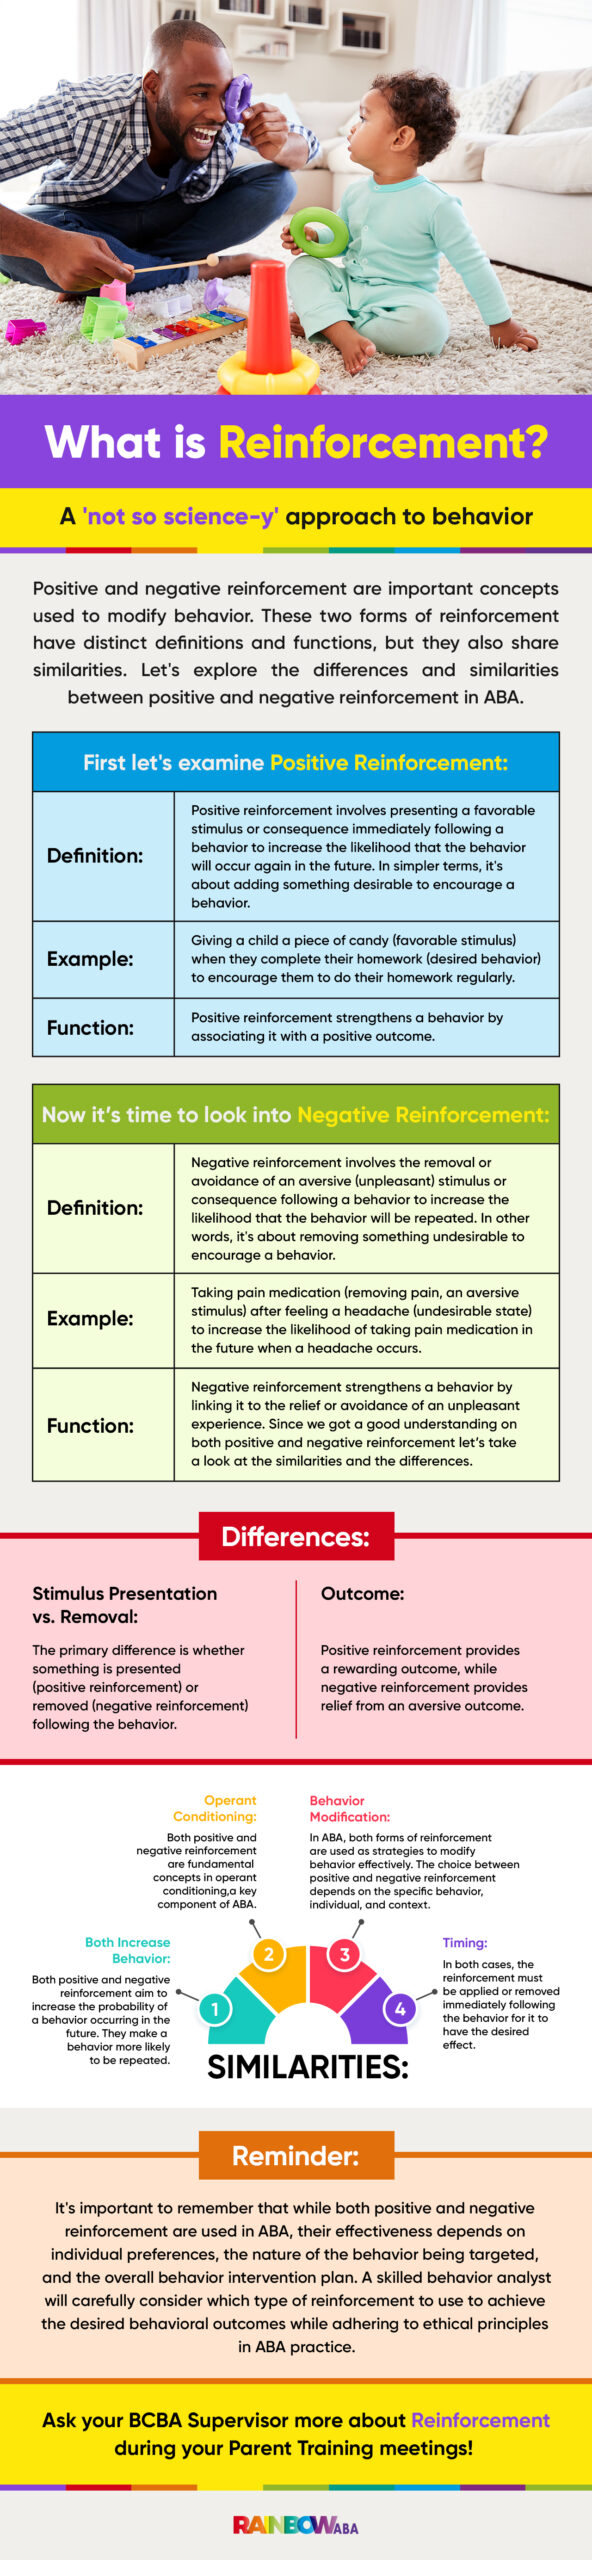 How do positive and negative reinforcement affect a teenager